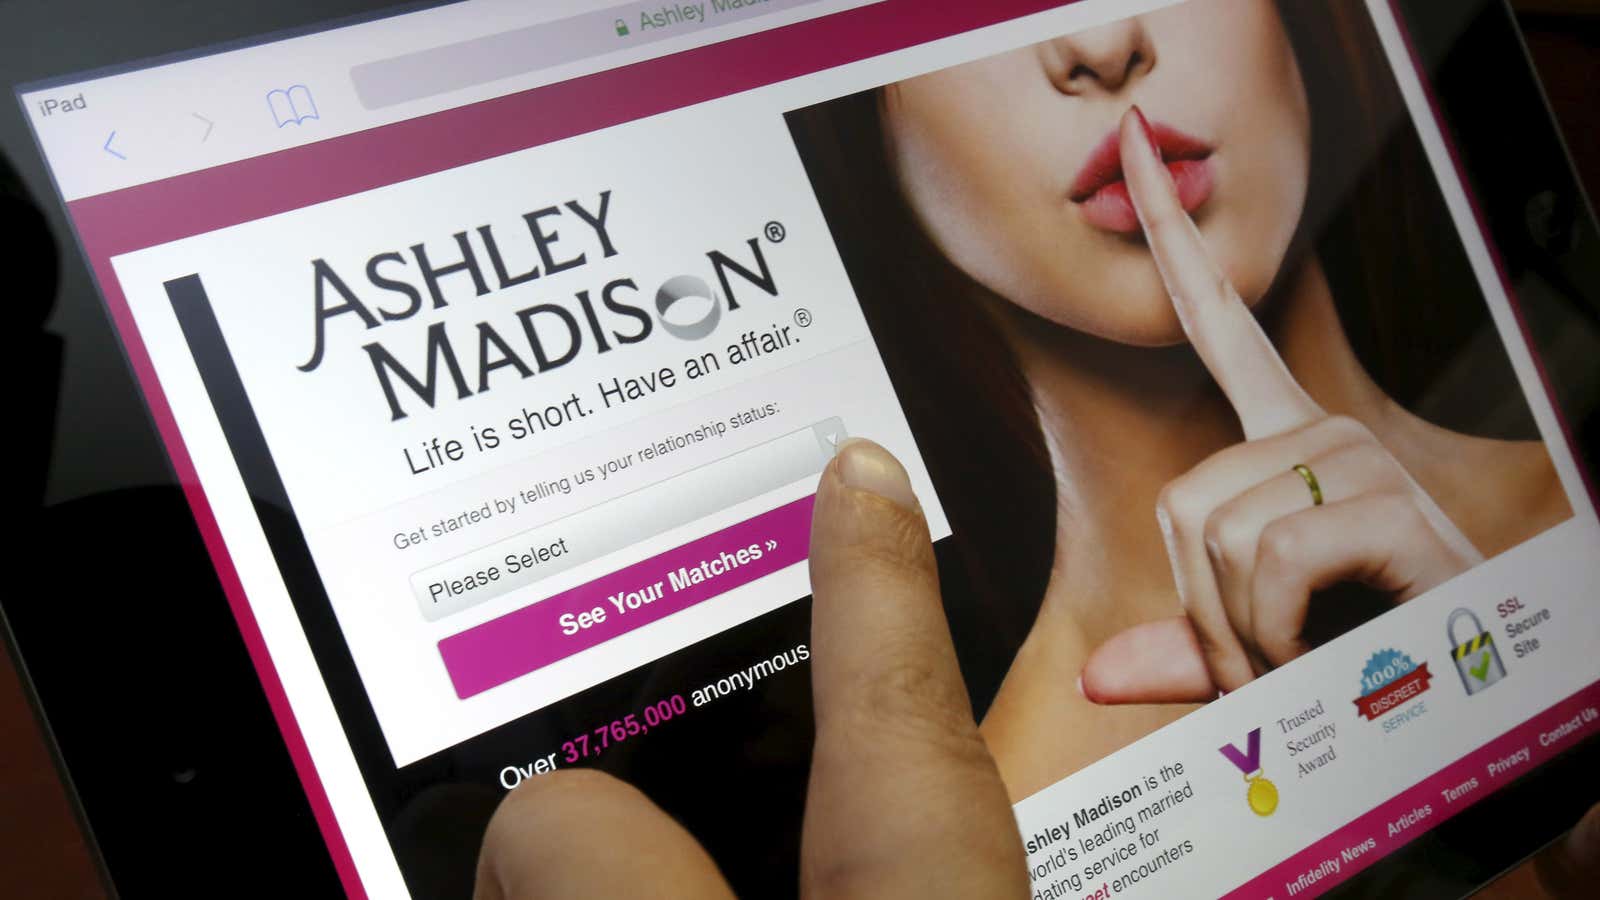 Most Ashley Madison members are men, but there are women on plenty of other dating sites